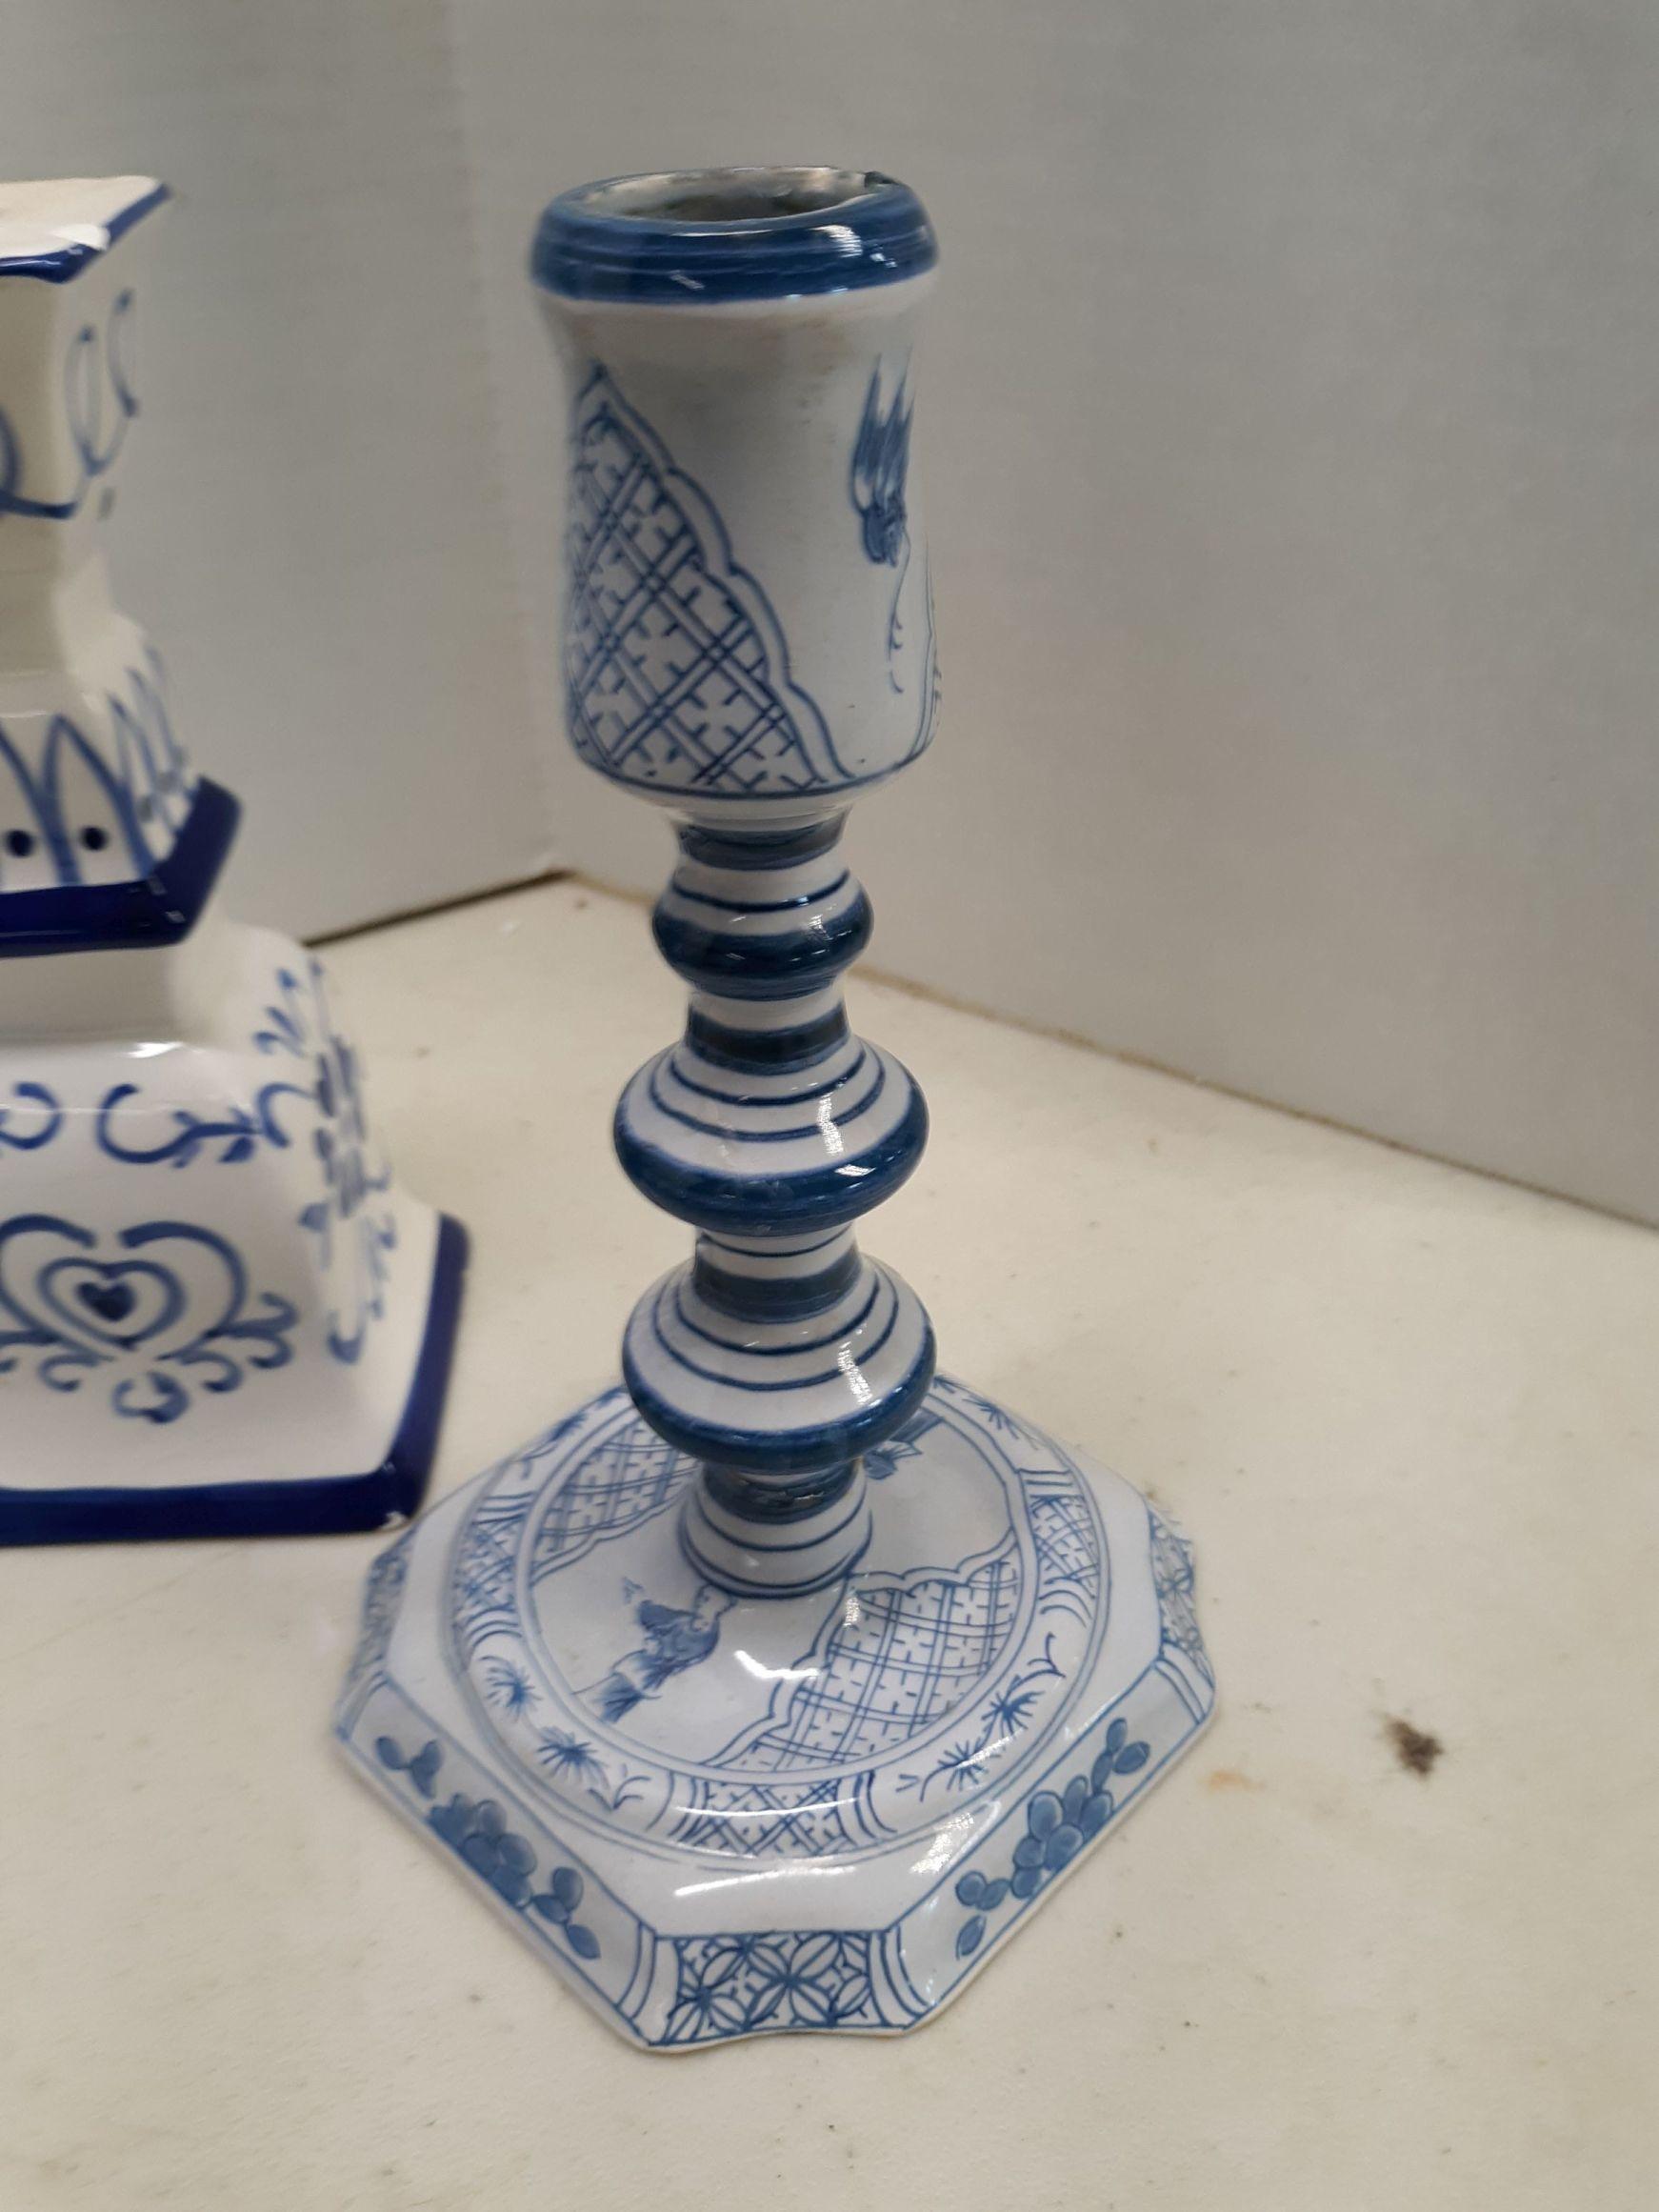 Blue and white ceramic candle sticks, lidded urn, two blue glass tall vases, martini glass